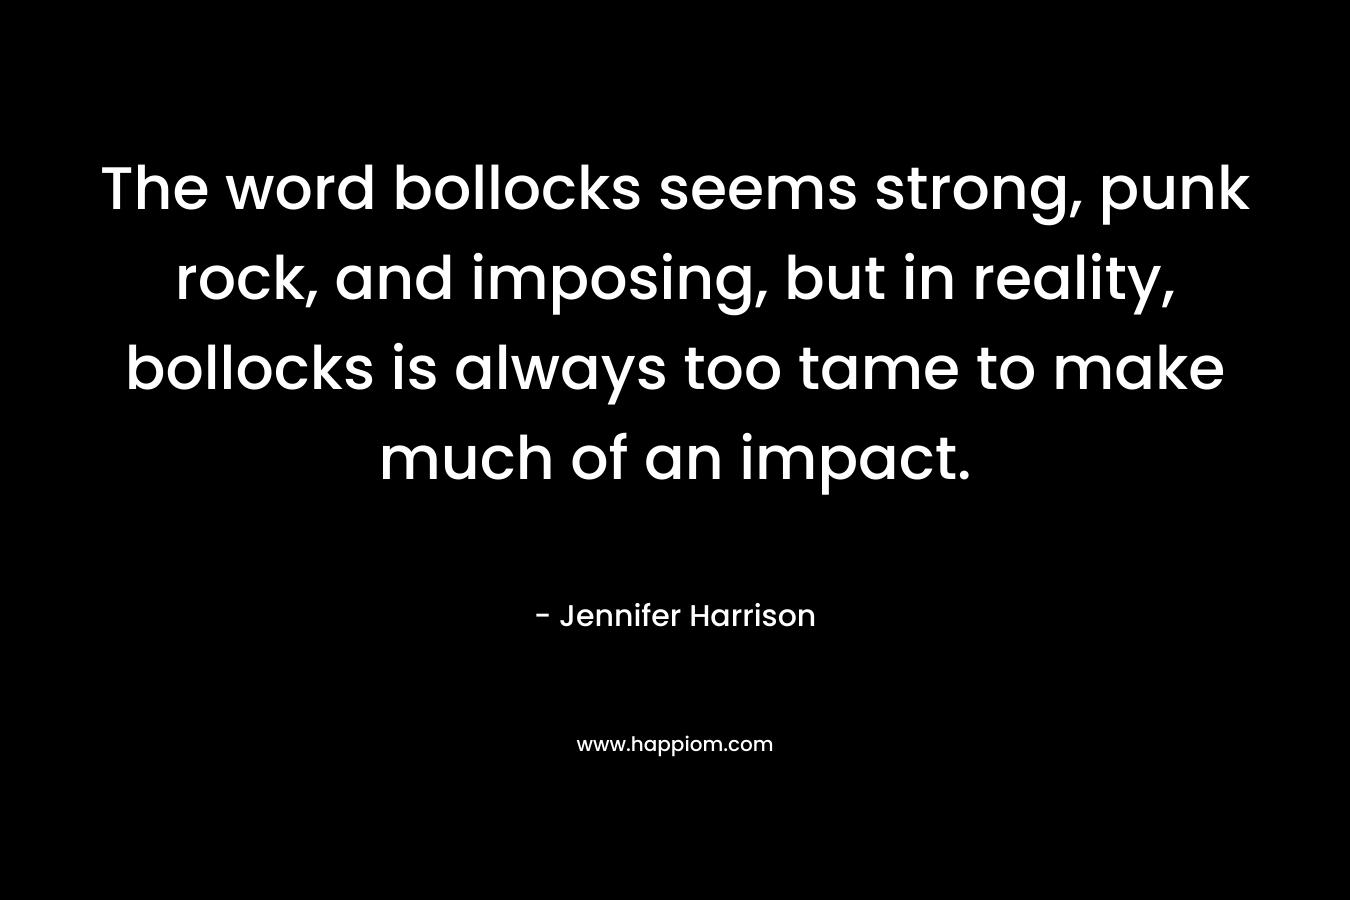 The word bollocks seems strong, punk rock, and imposing, but in reality, bollocks is always too tame to make much of an impact. – Jennifer     Harrison